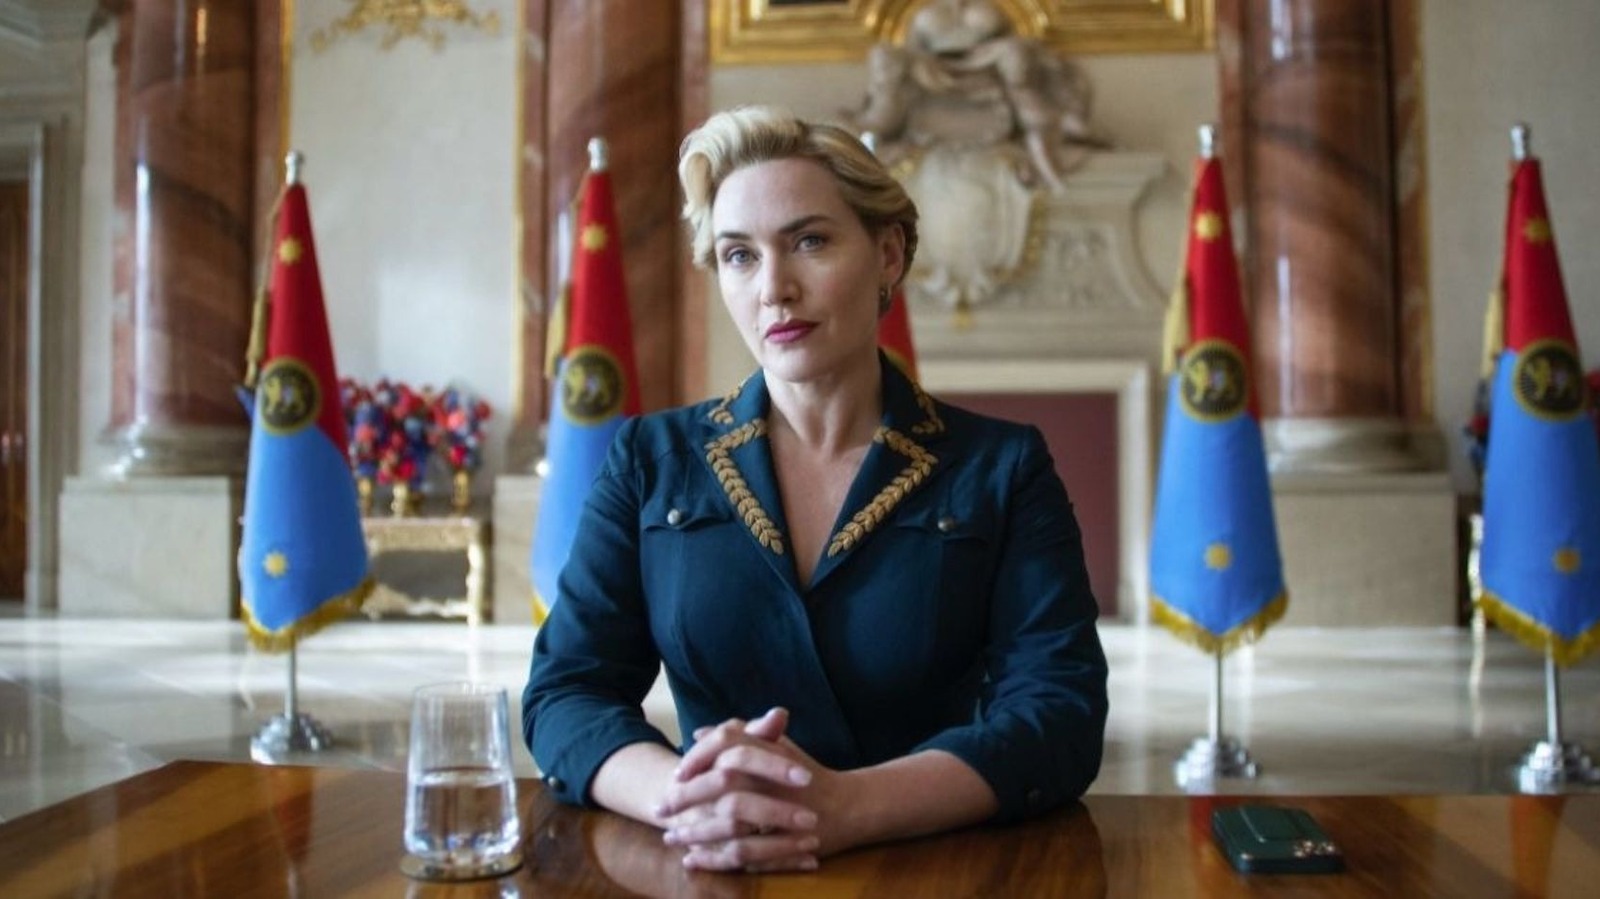 The Regime Trailer Kate Winslet Goes Full Succession In HBO's New Series